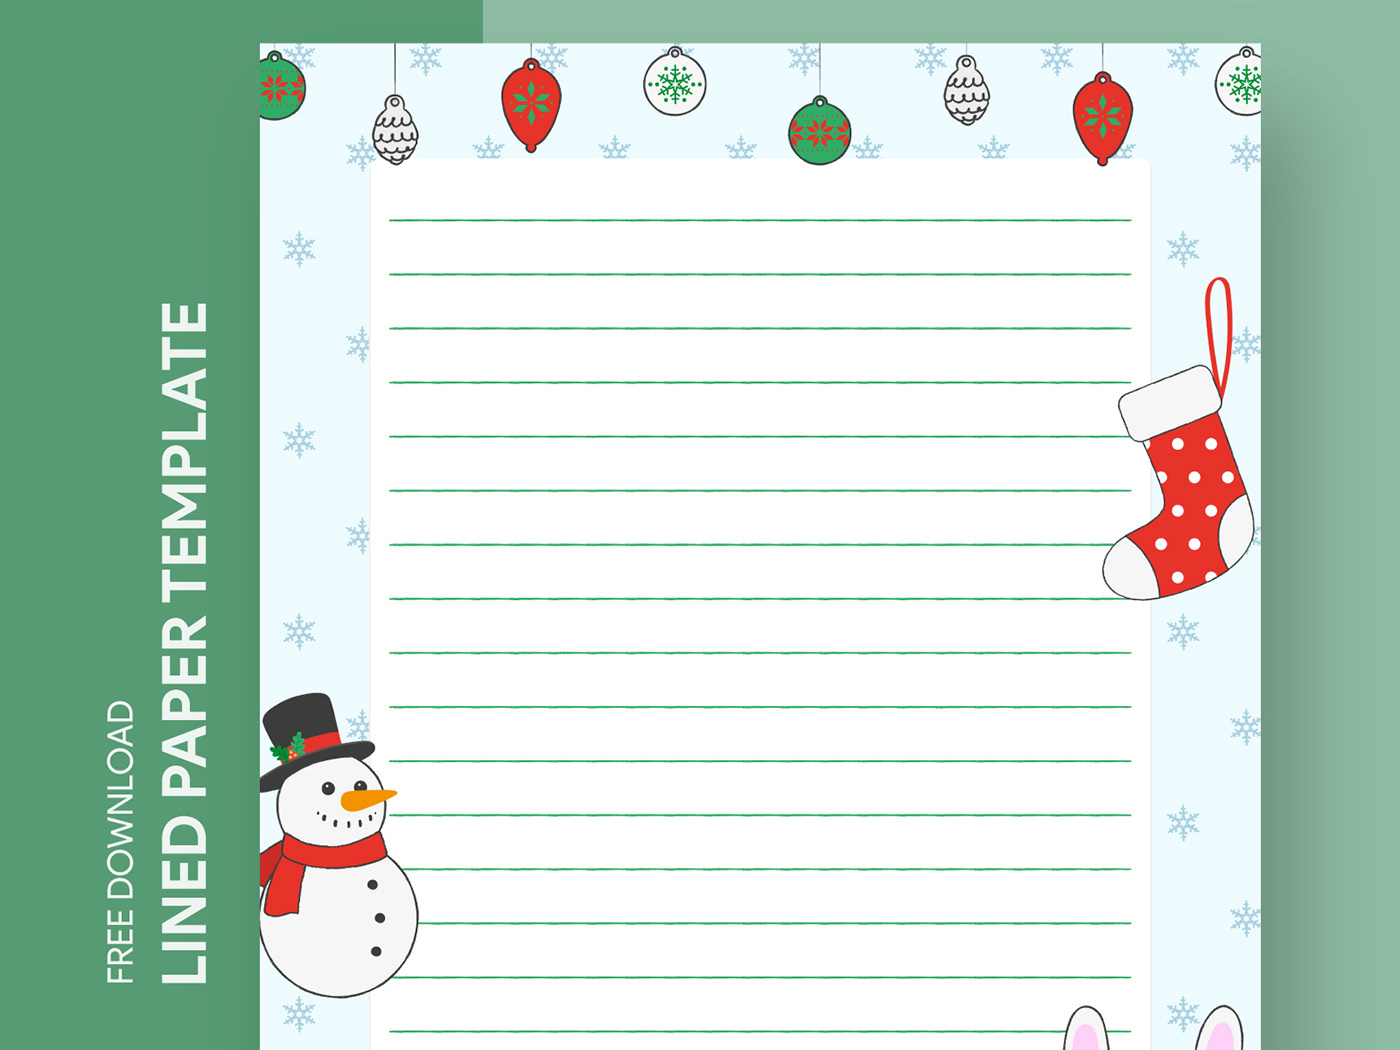 Christmas docs google Holiday holidays letter lined paper template xmas